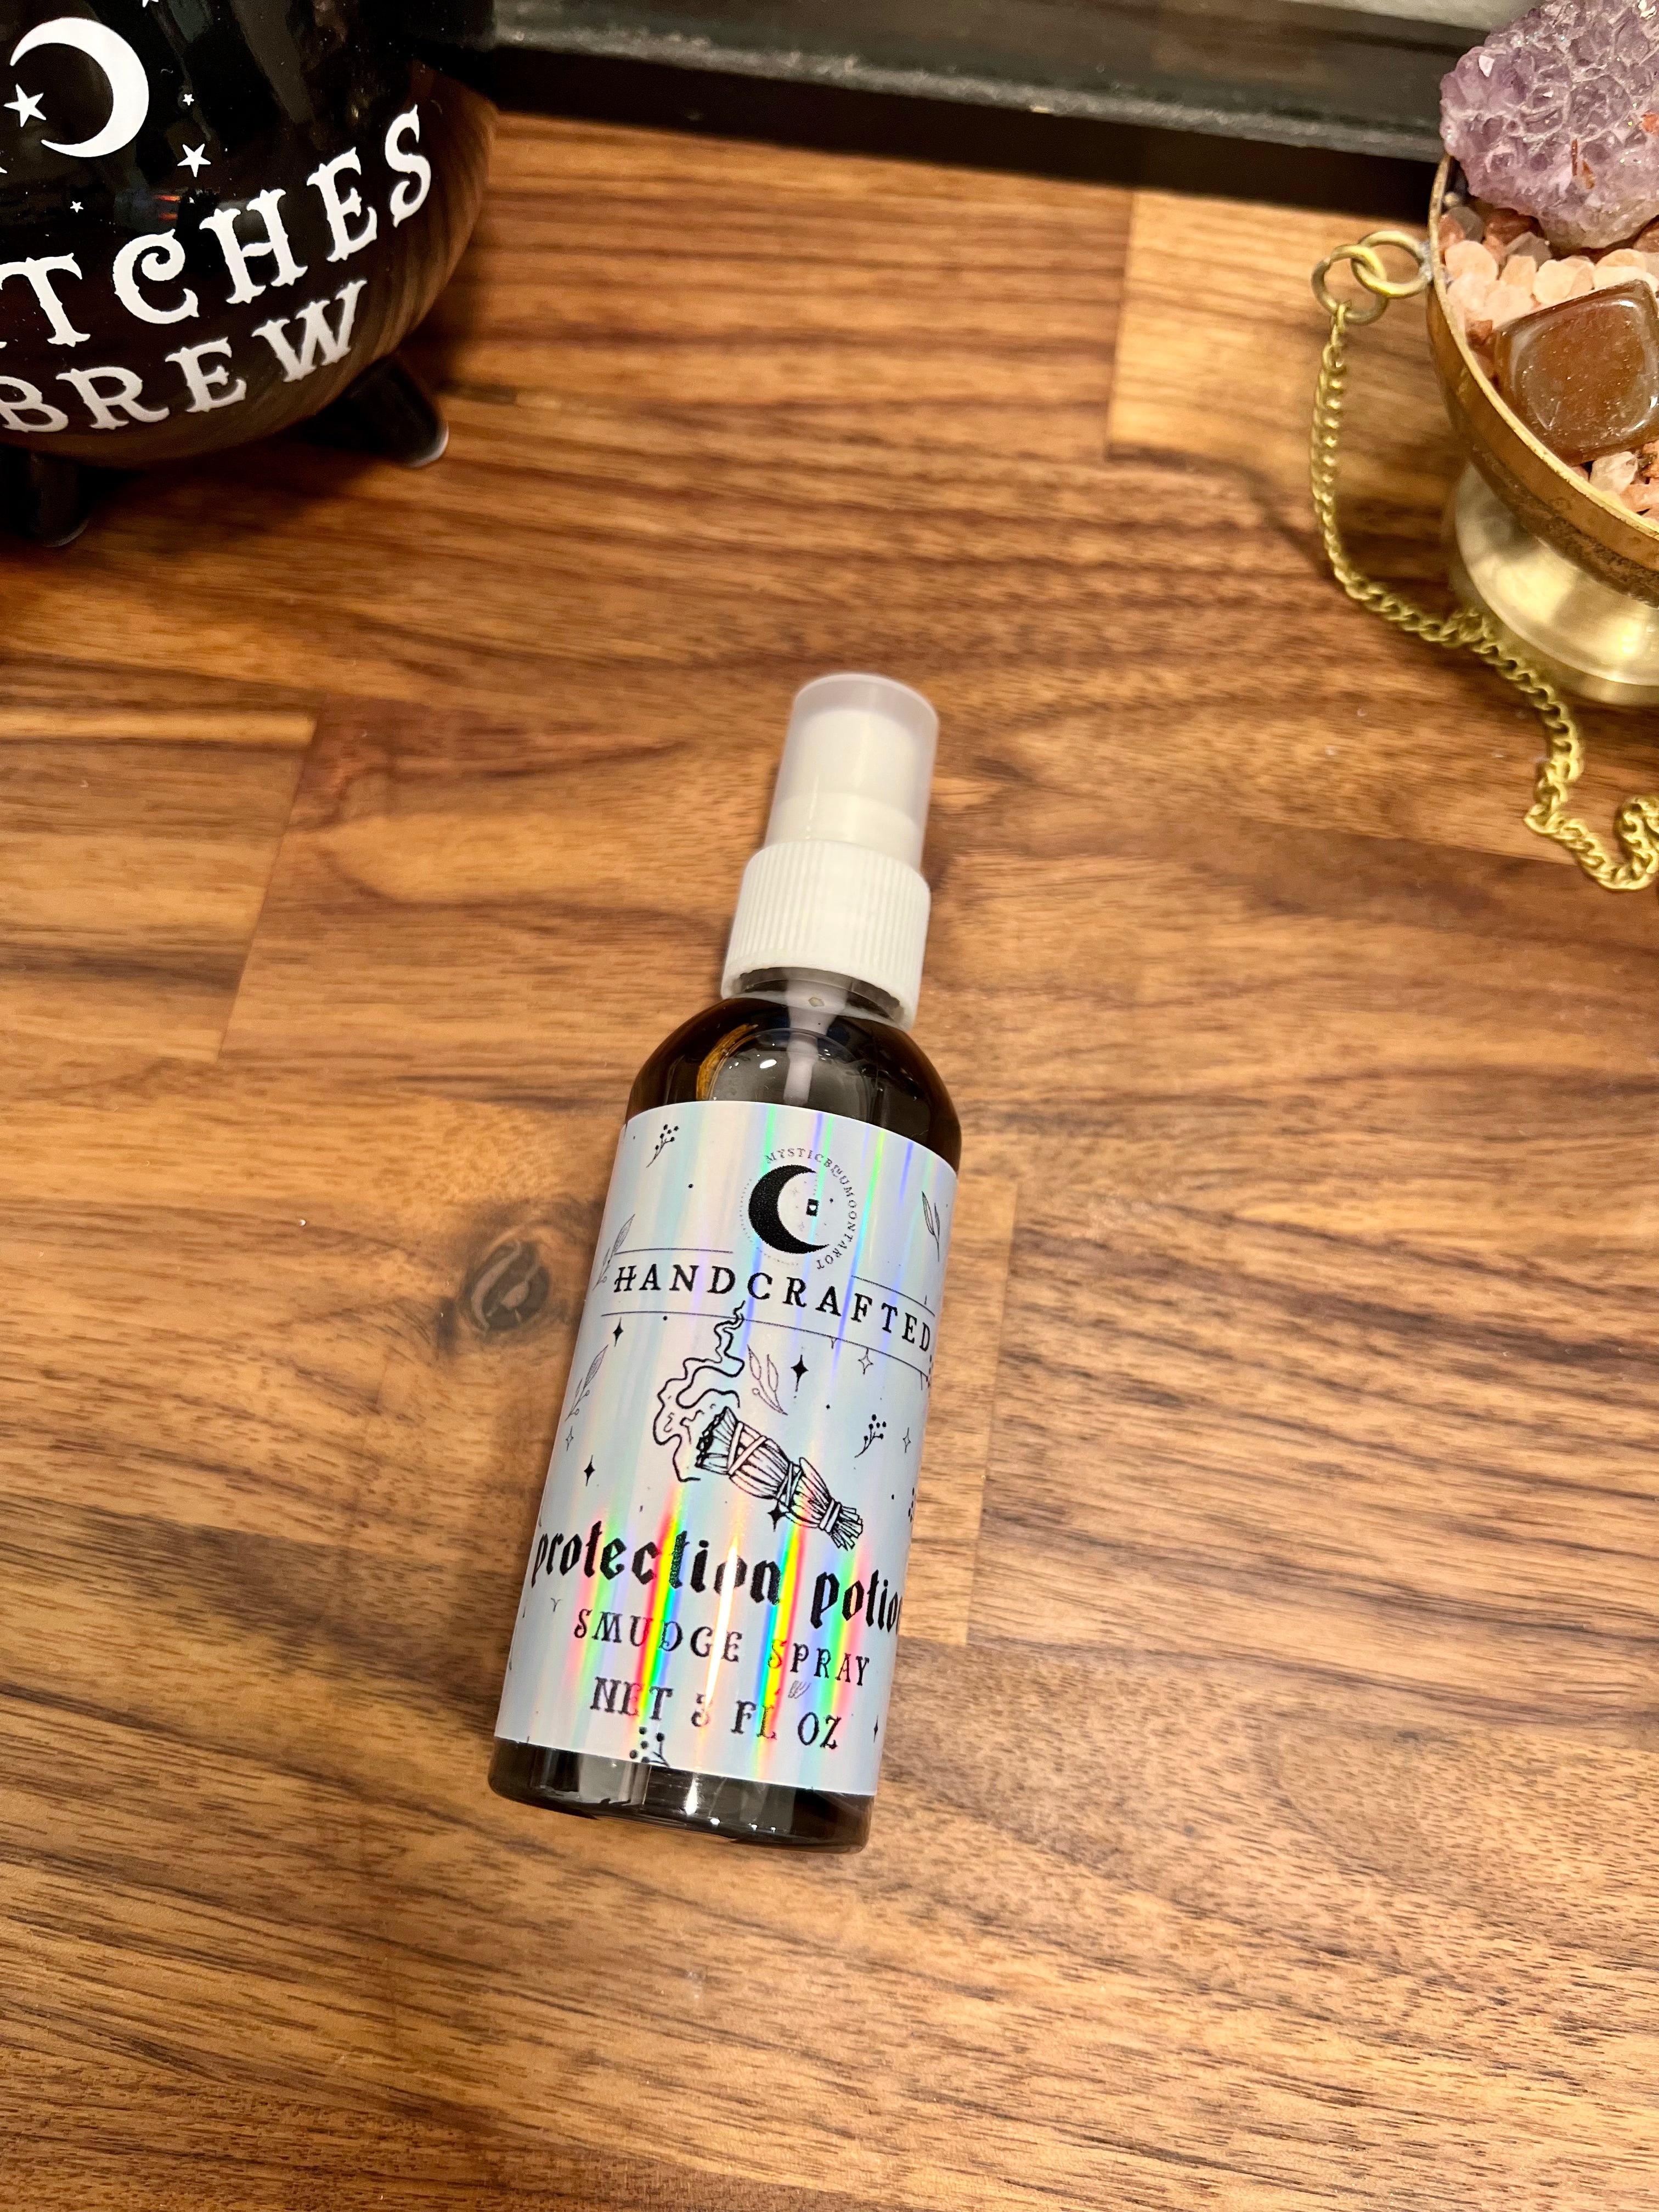 Protection Spray Cleanse: 2oz  Smudge Spray - Remove Negative Energy and Purify Your Space